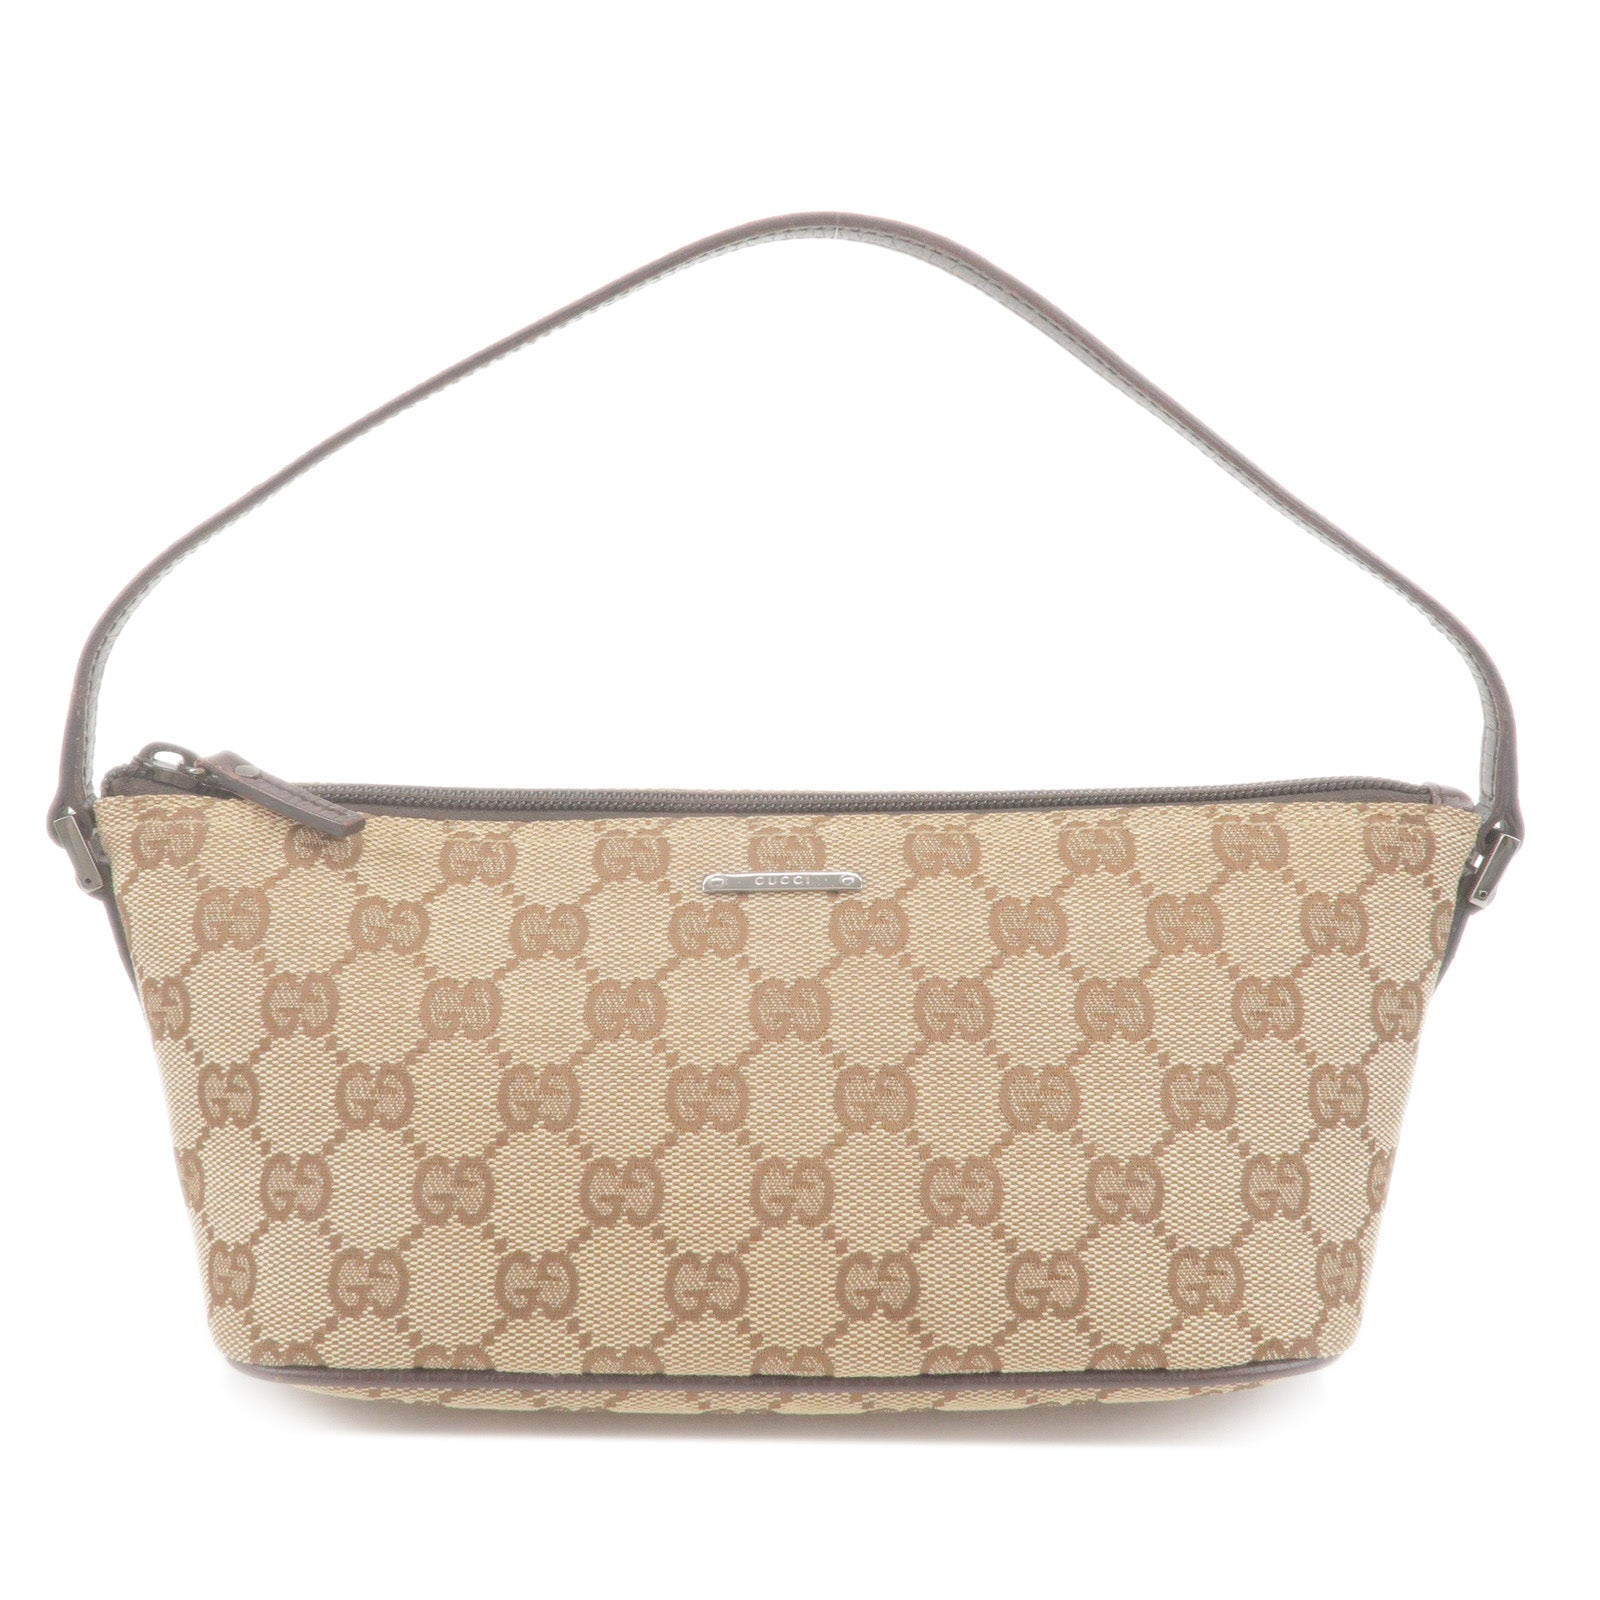 GUCCI-Boat-Bag-GG-Canvas-Leather-Hand-Bag-Beige-Brown-07198